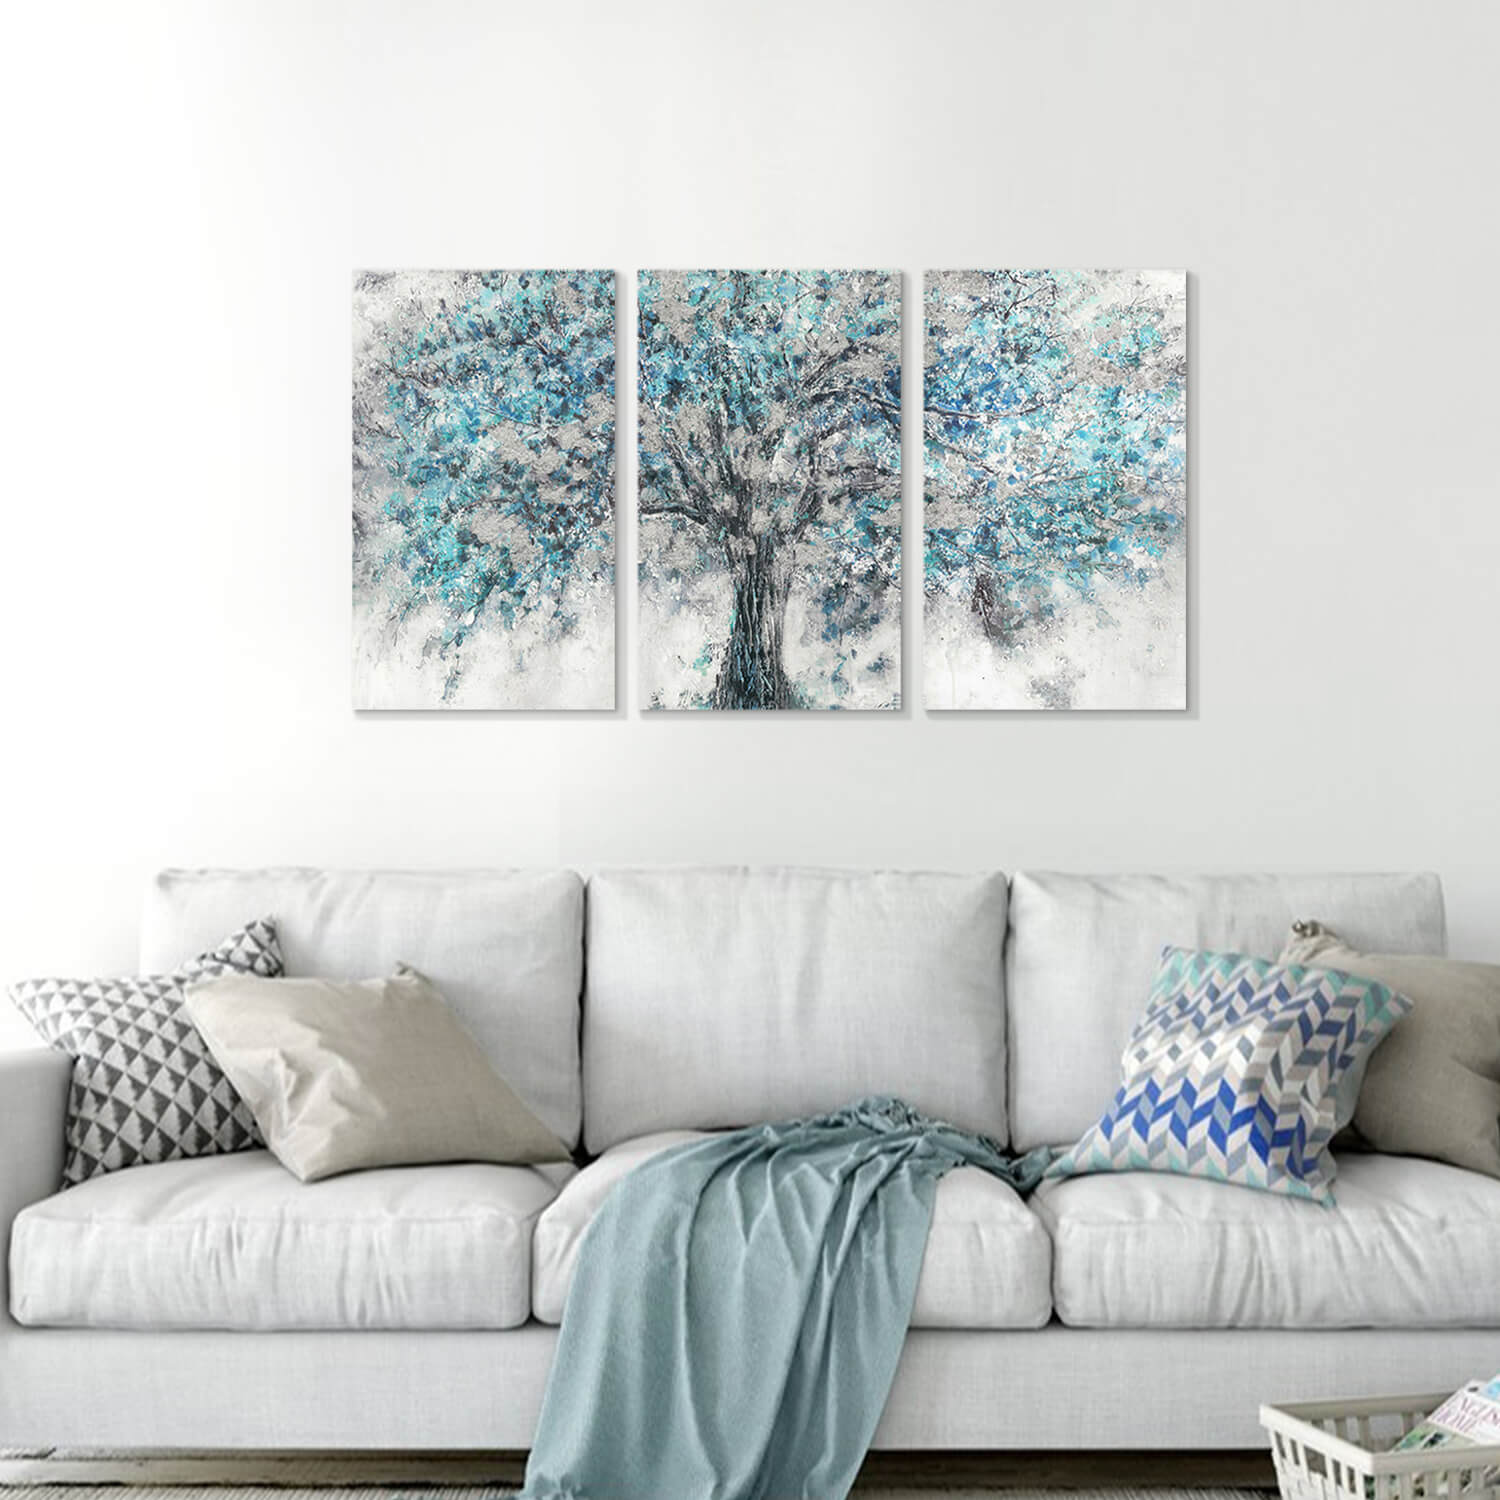 Beautiful Flower Tree Painting Wall Art Print On Canvas For Wall Decor Artistic Path